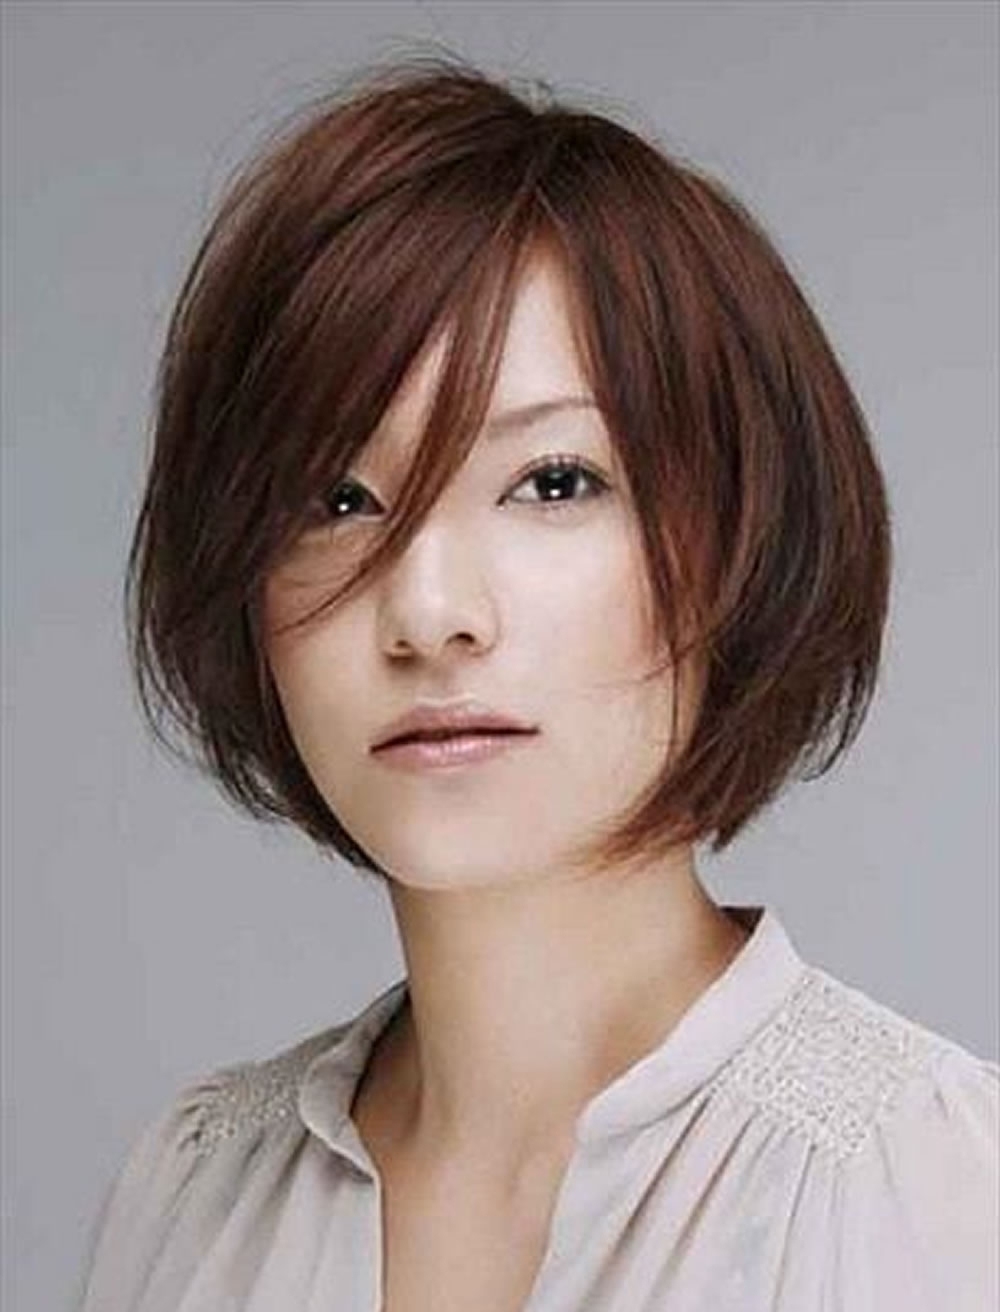 50 Glorious Short Hairstyles For Asian Women For Summer Days 2018 pertaining to Asian Short Hairstyles 2018